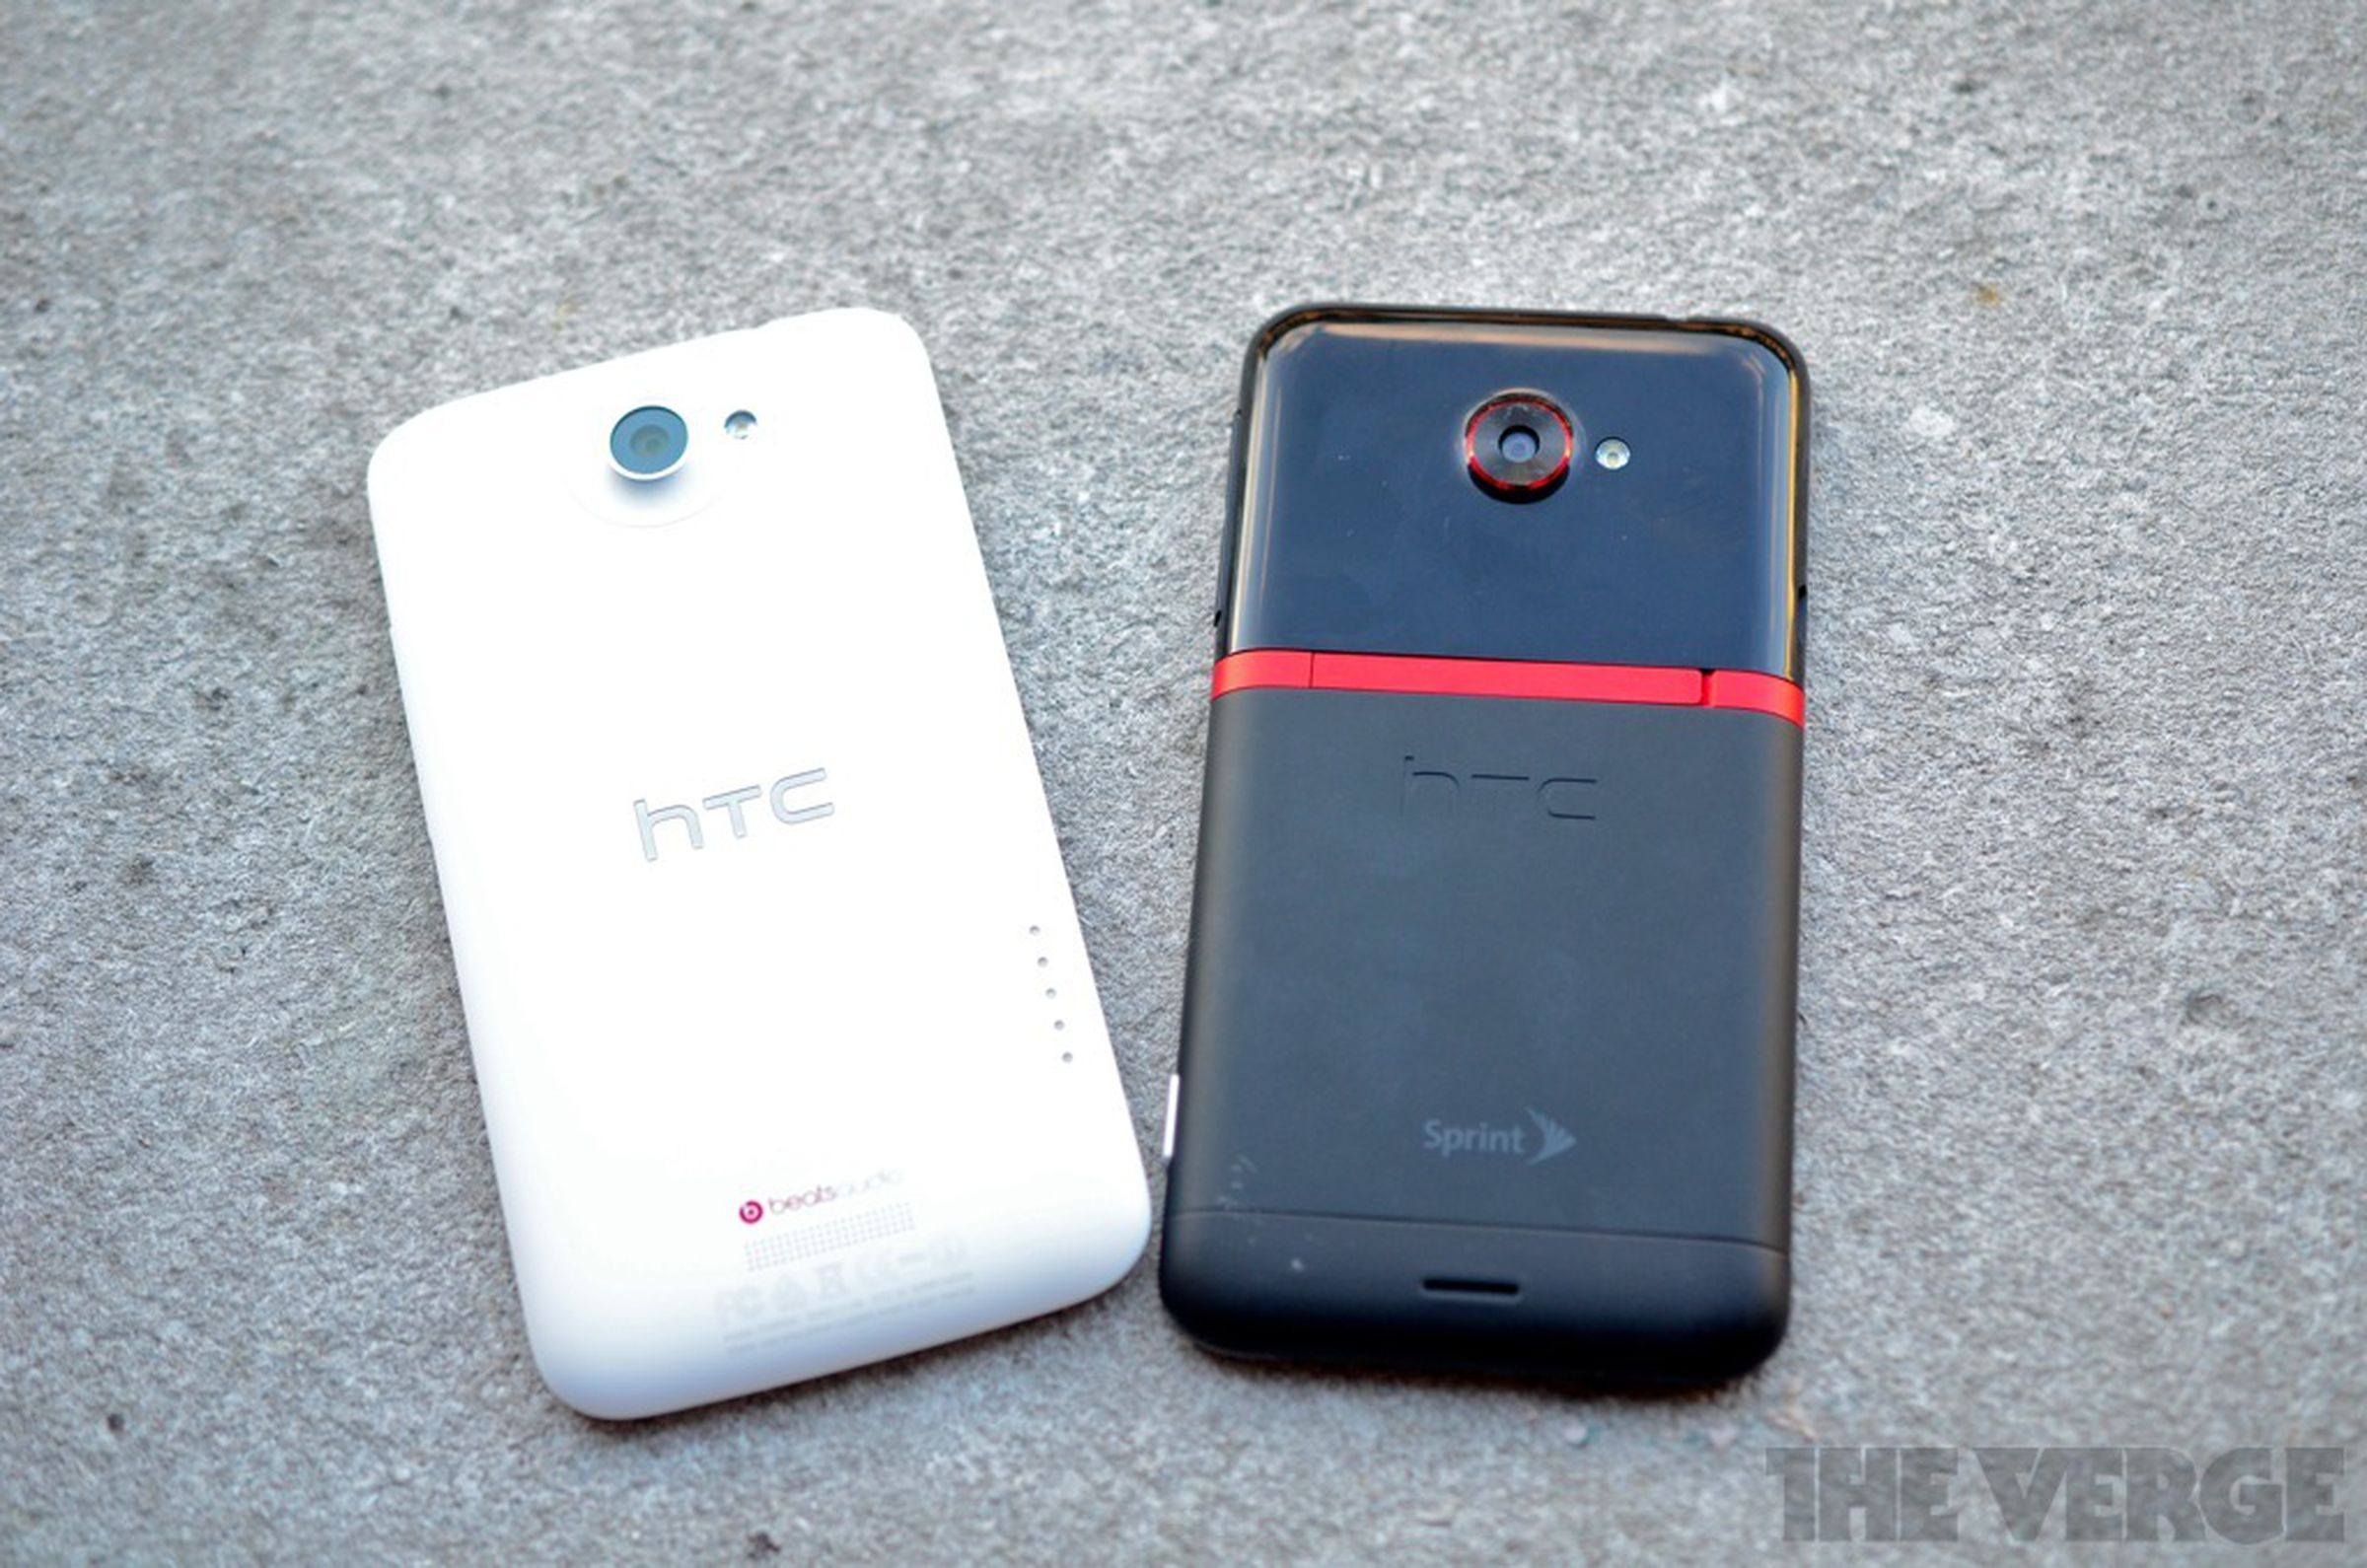 HTC Evo 4G LTE review pictures